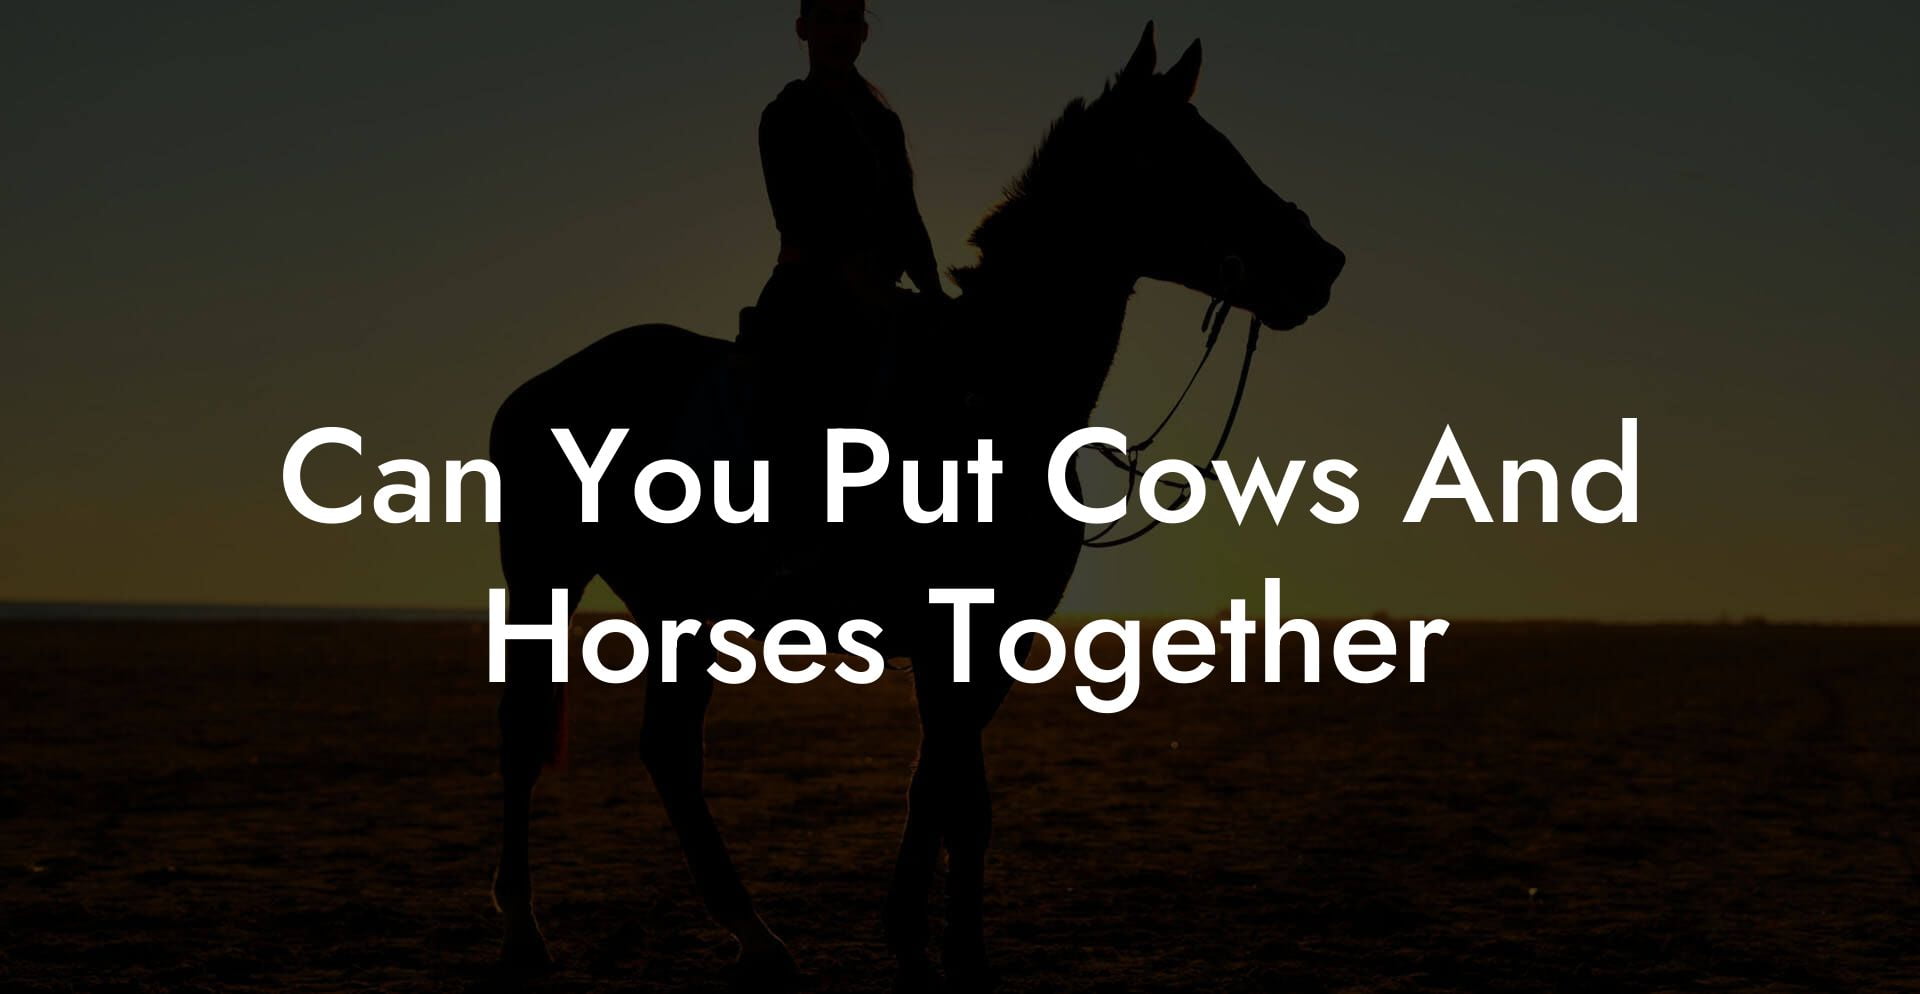 Can You Put Cows And Horses Together